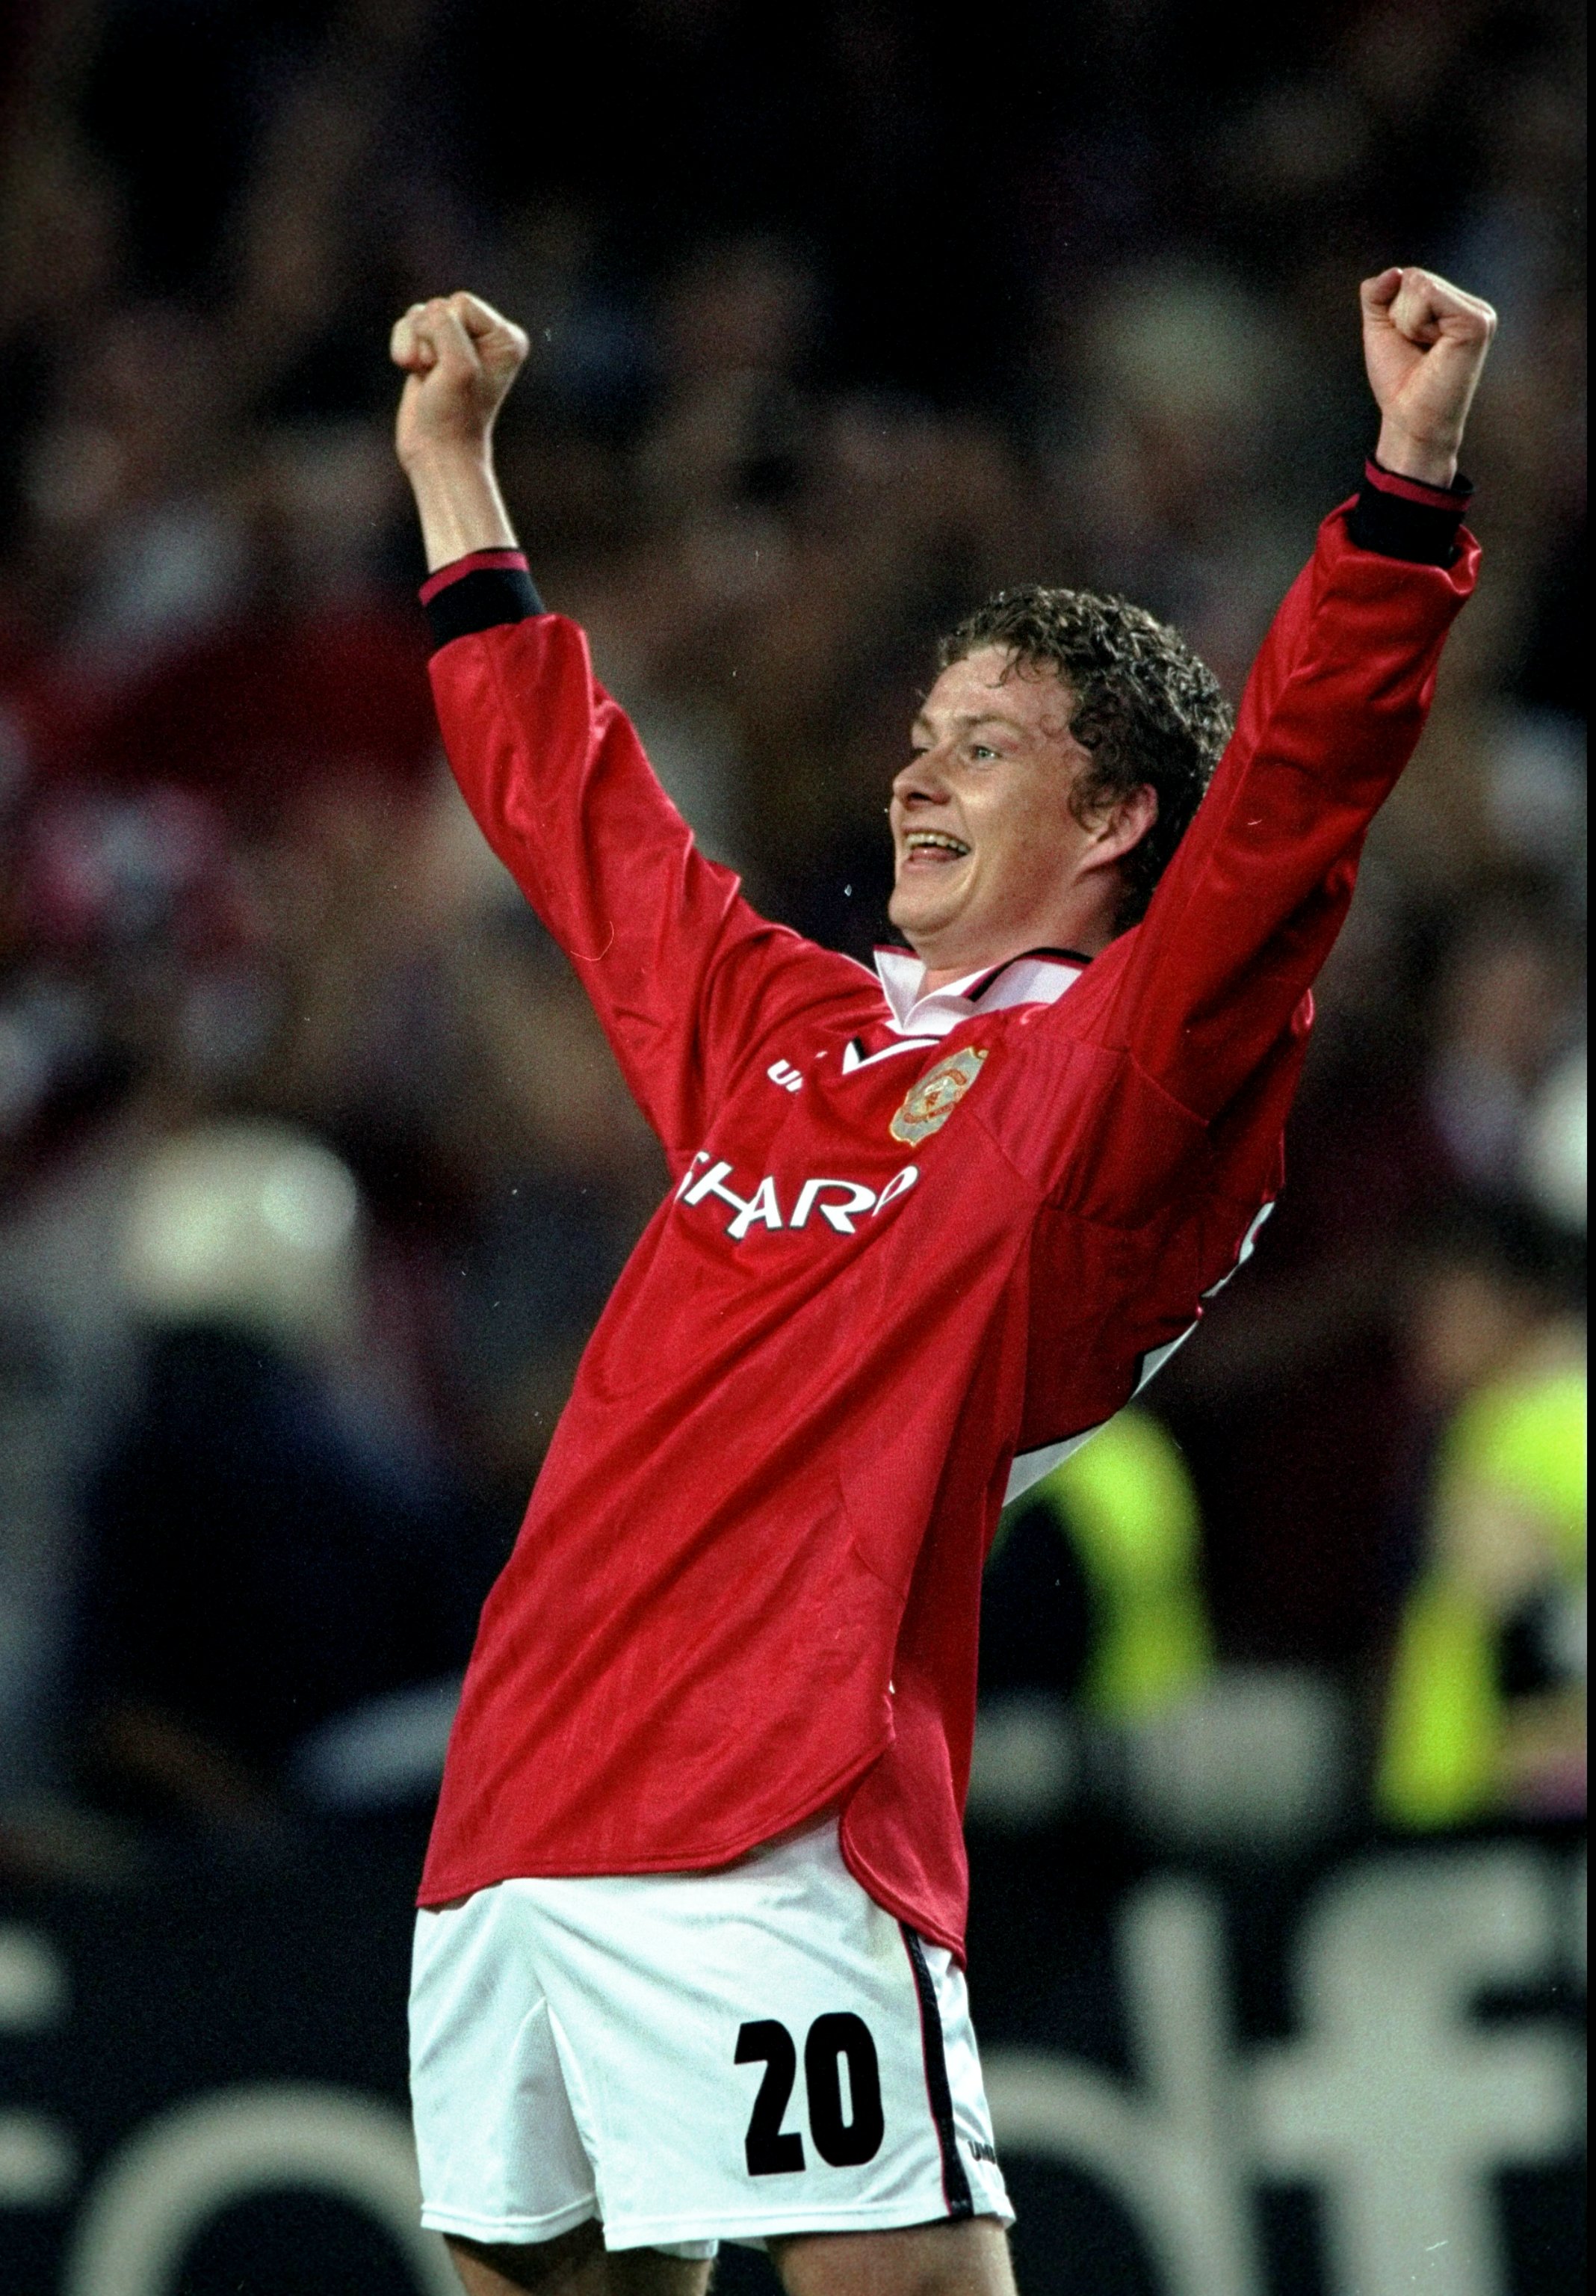 26 May 1999:  Ole Gunnar Solskjaer celebrates the final whistle and victory for Manchester United in the European Champions League Final against Bayern Munich in the Nou Camp Stadium, Barcelona, Spain. Solskjaer scored the second goal for United as theywo